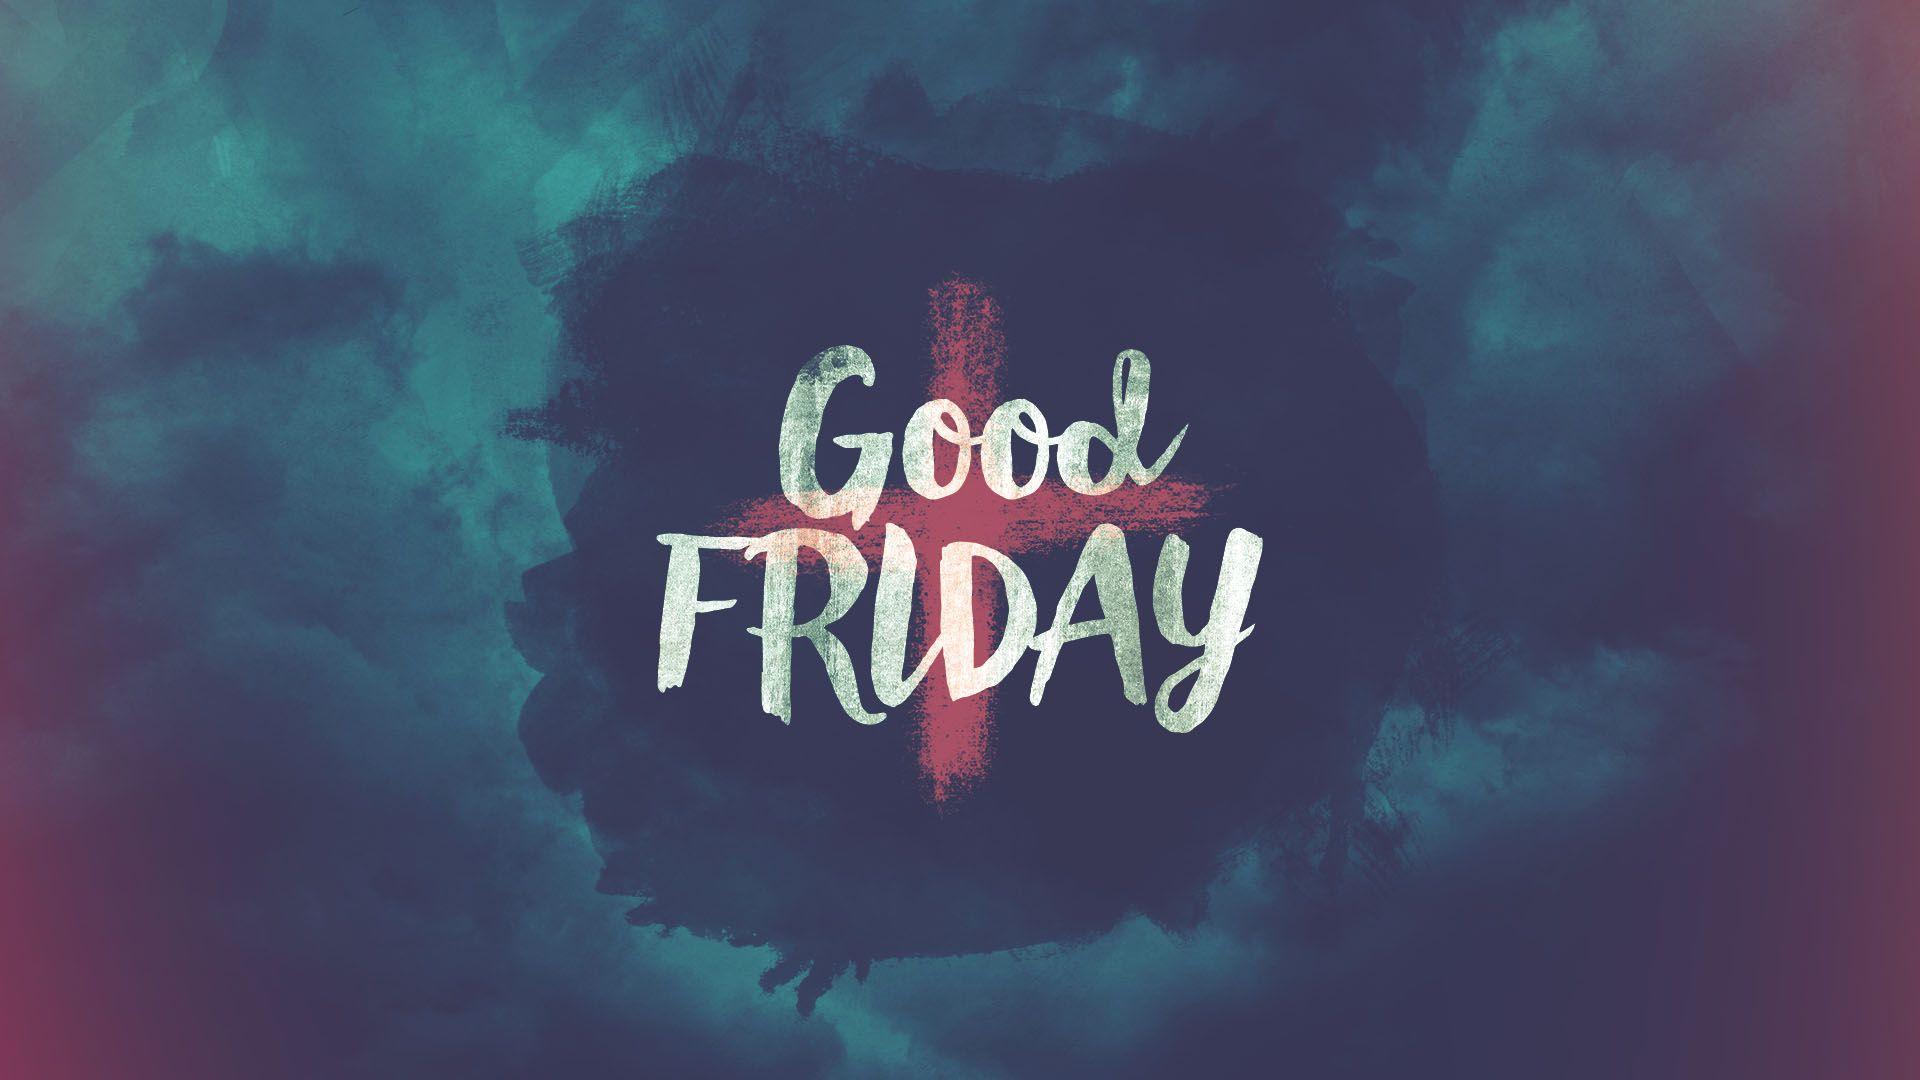 Good Friday 2018 Wallpapers - Wallpaper Cave